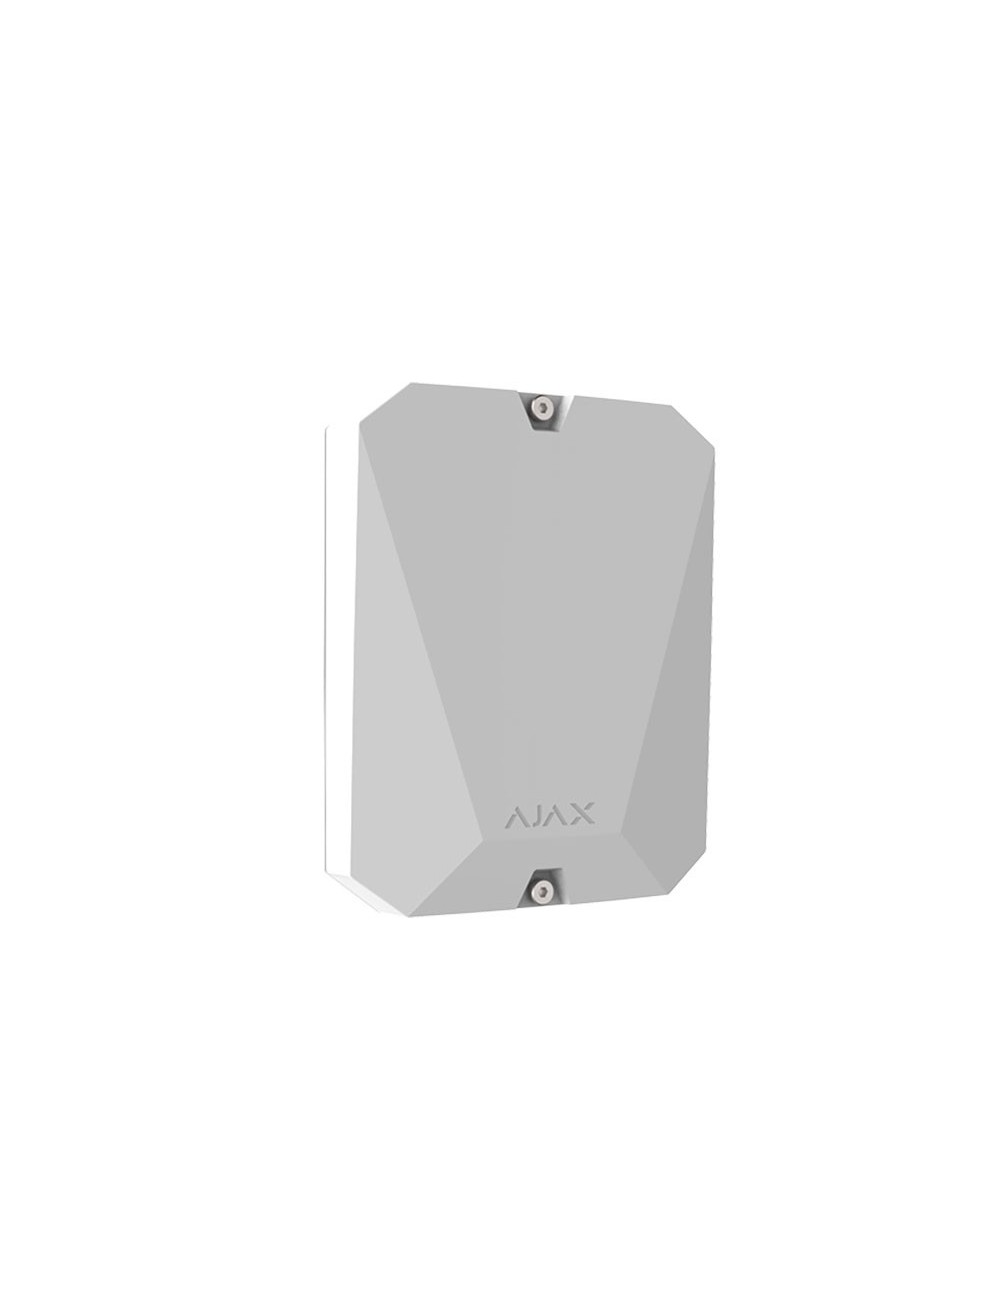 MultiTransmitter wireless module for connecting alarms wired Ajax white